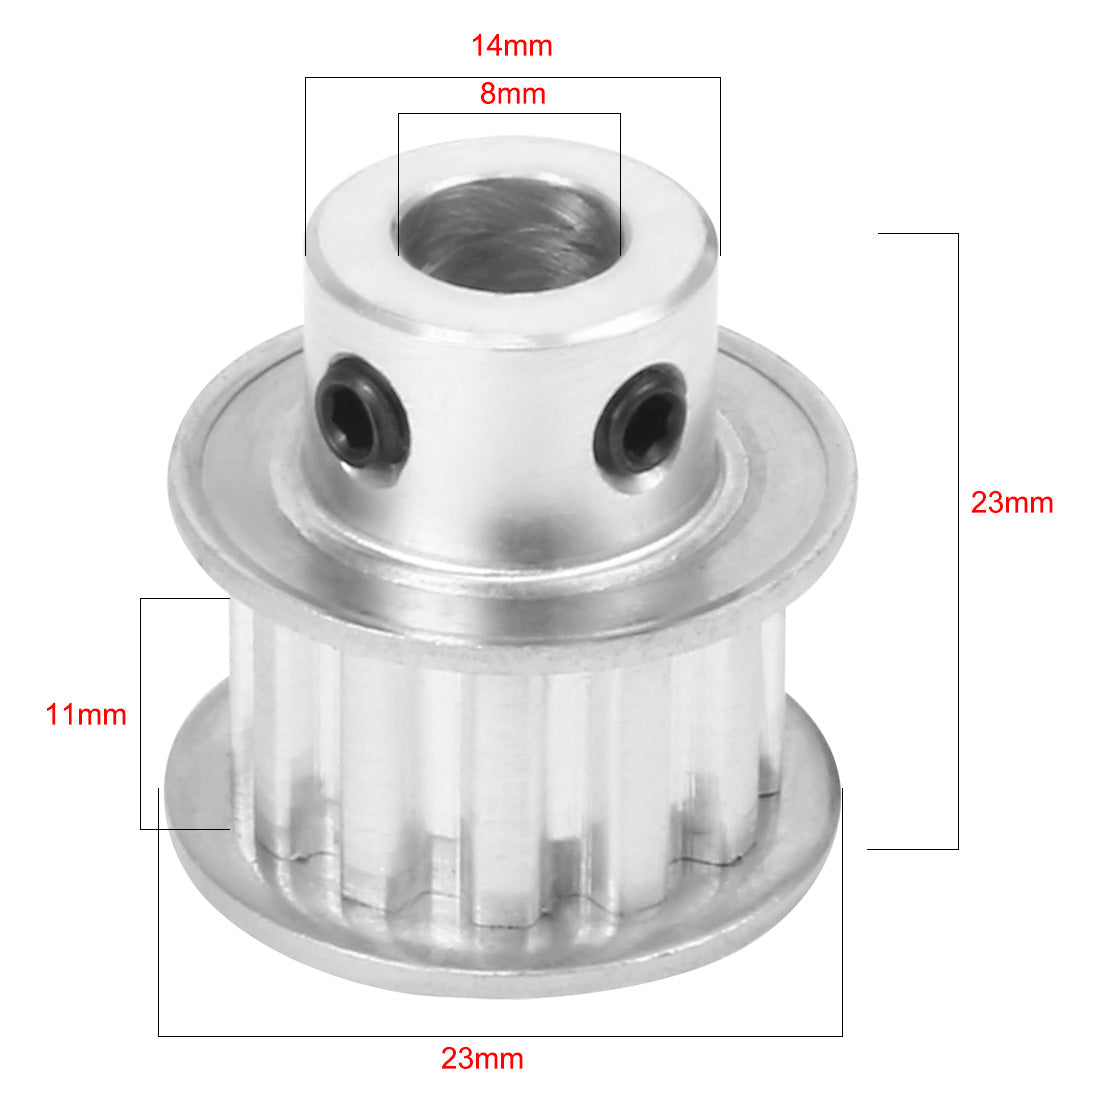 uxcell Uxcell Aluminum 12 Teeth 8mm Bore 5.08mm Timing Belt Pulley for 10mm Belt